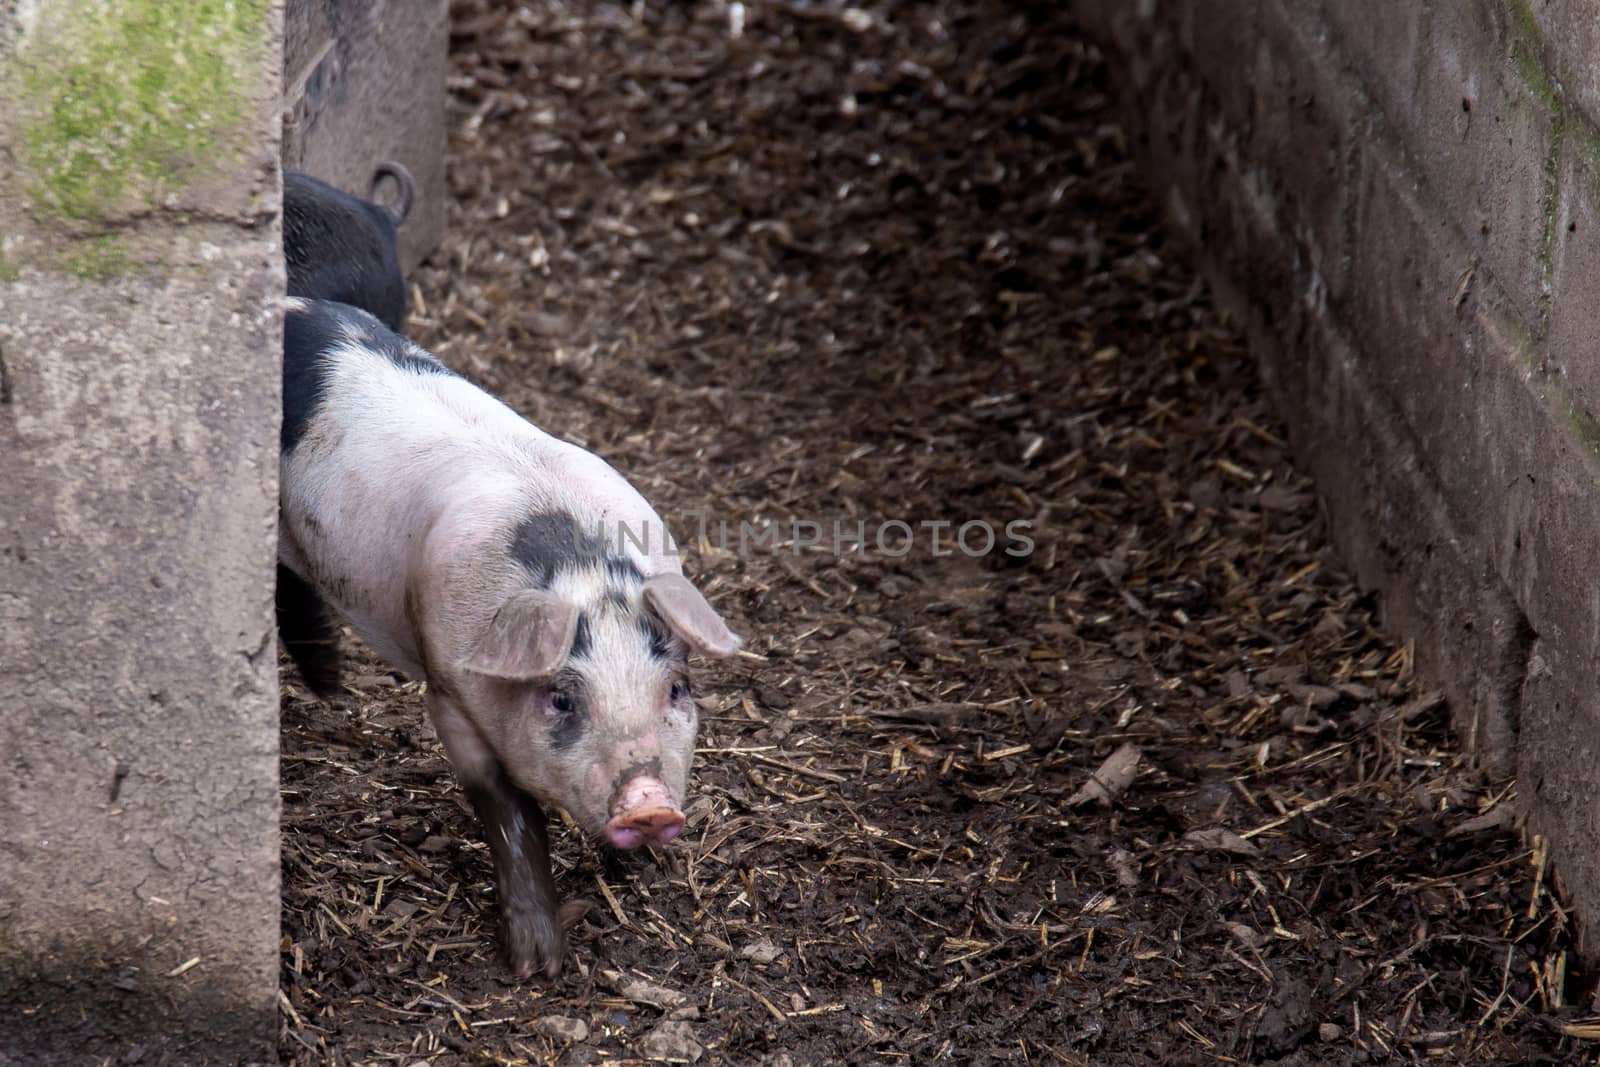 Saddleback piglet in a pigsty on a farm by magicbones